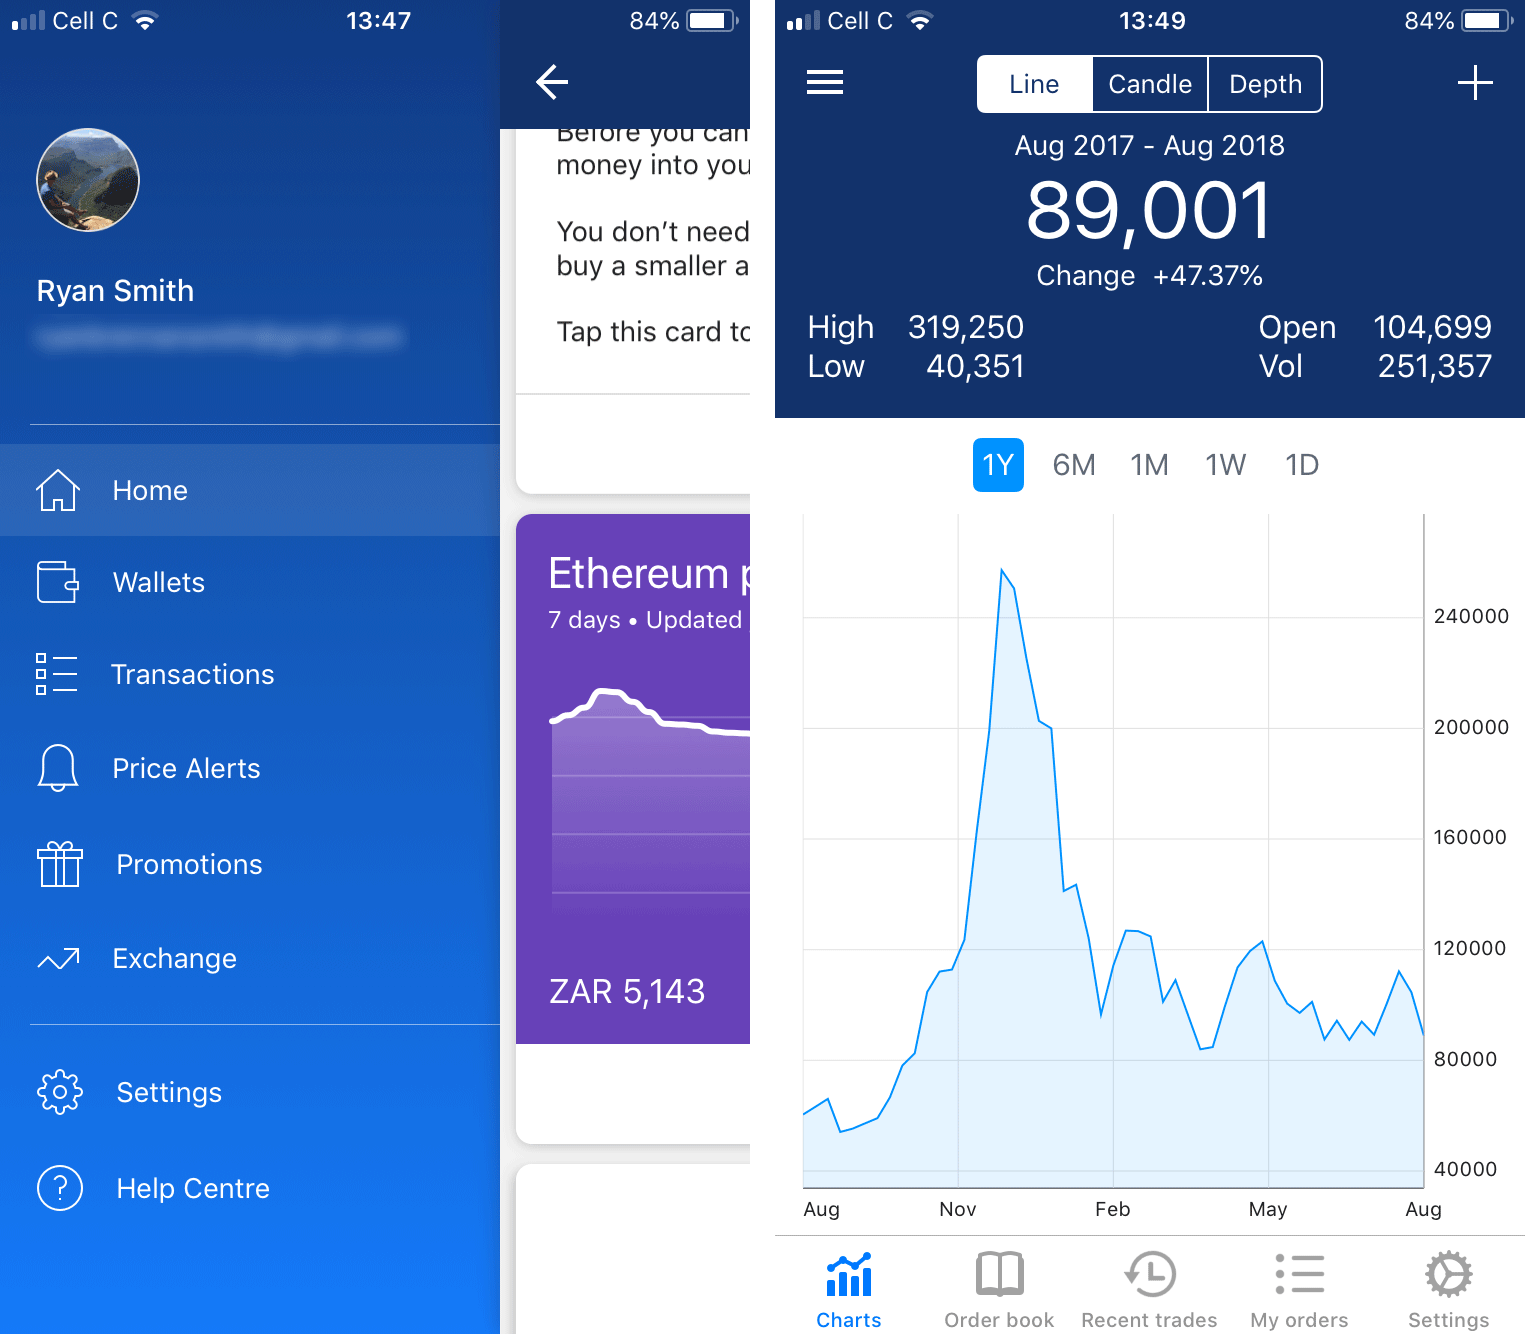 Luno review. The Luno app seems quite easy to use